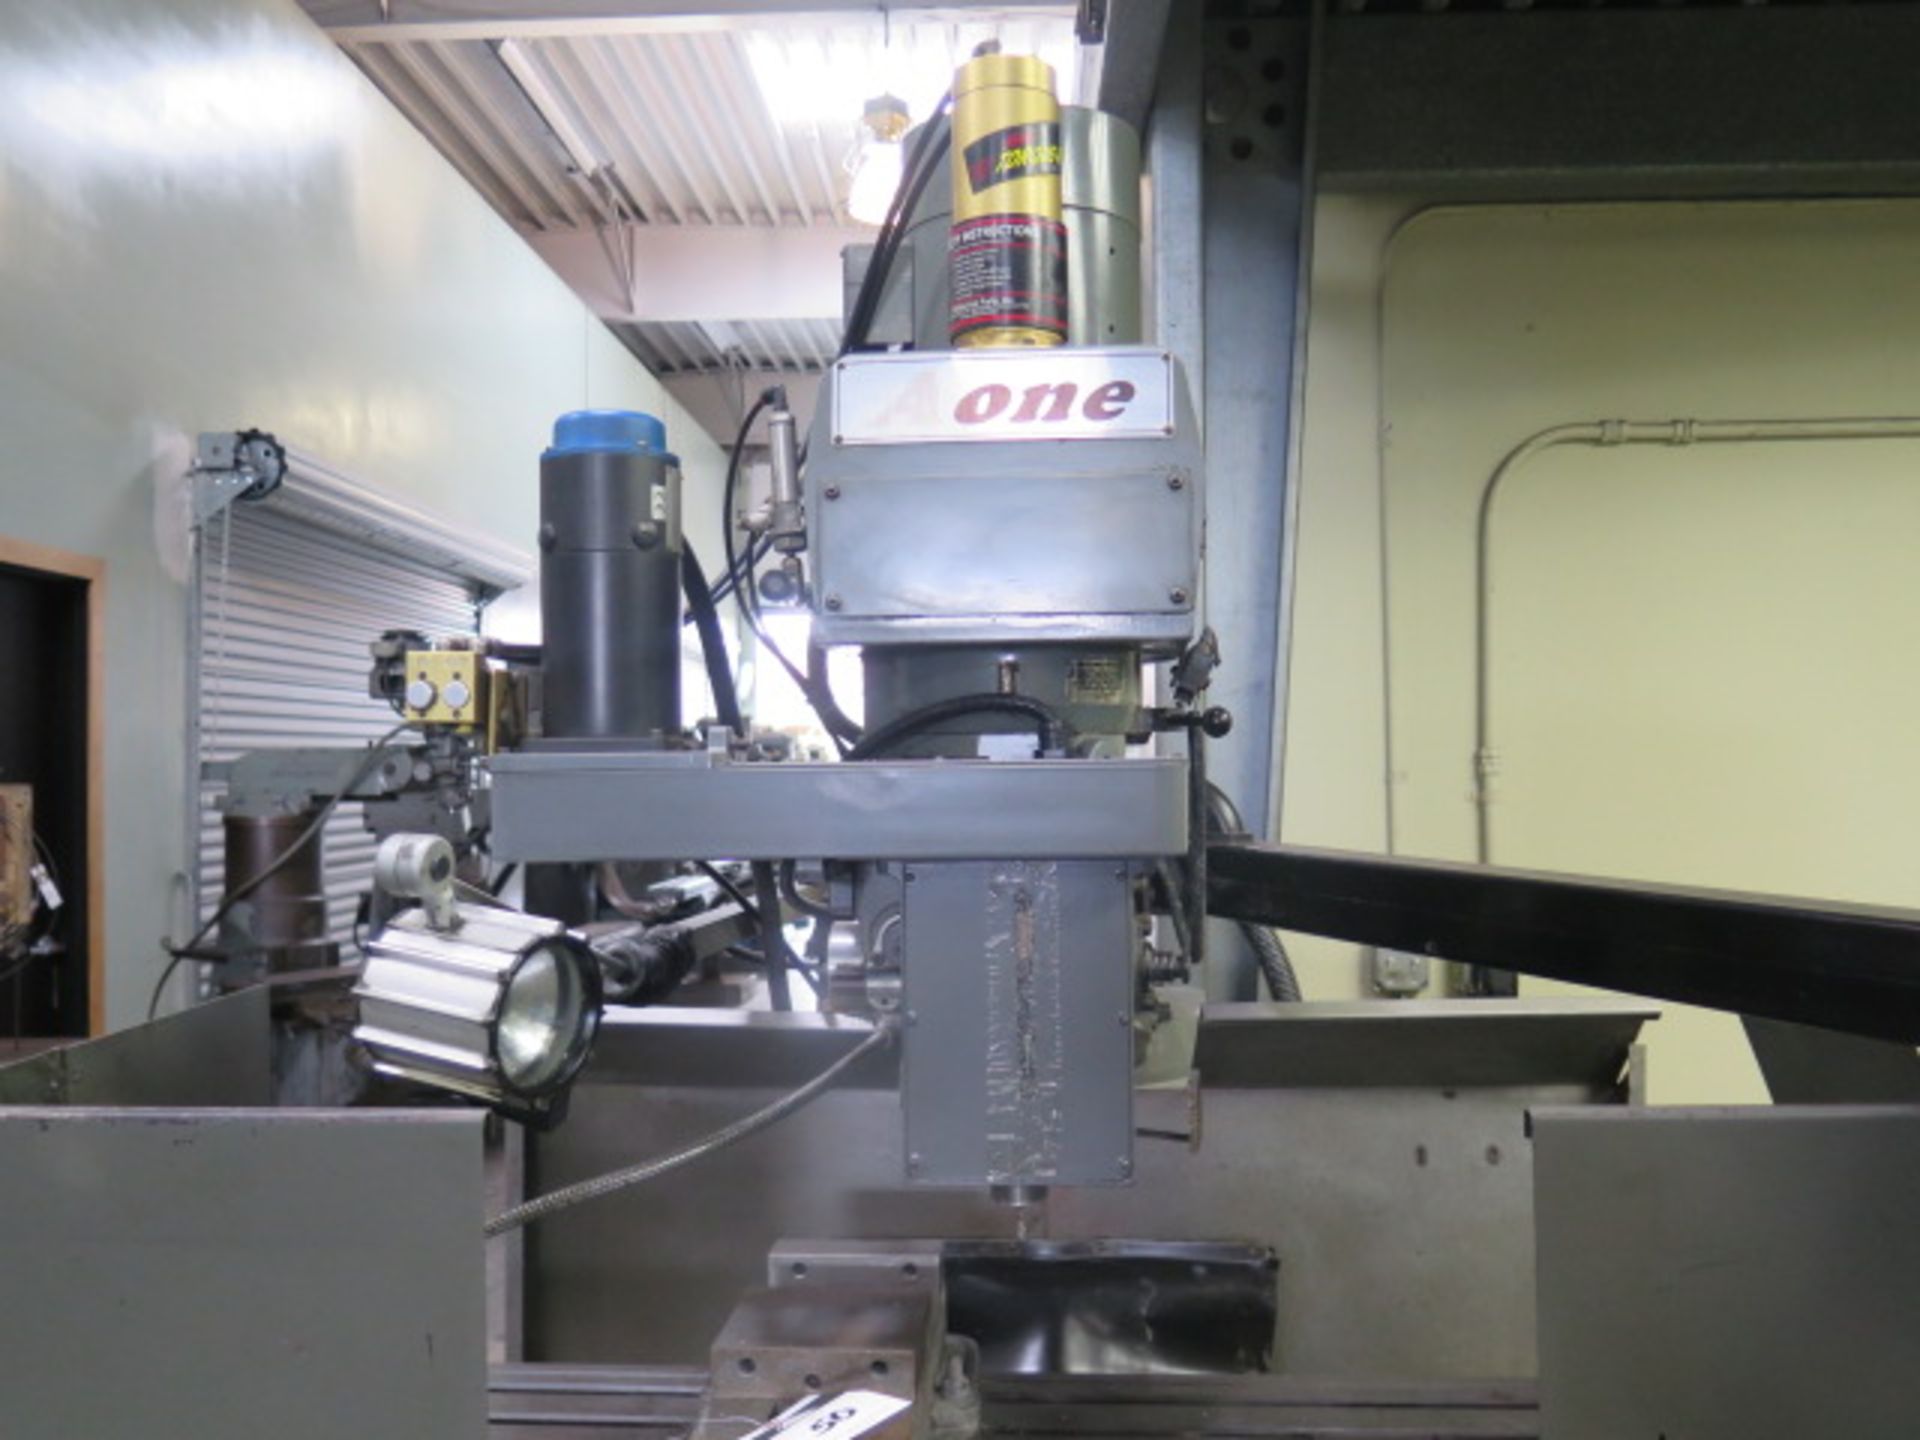 2006 Atrump “A One” 3VK WVERTER 3-Axis CNC Vertical Mill s/n 95041 w/ Centroid Controls, Hand Wheel, - Image 4 of 12